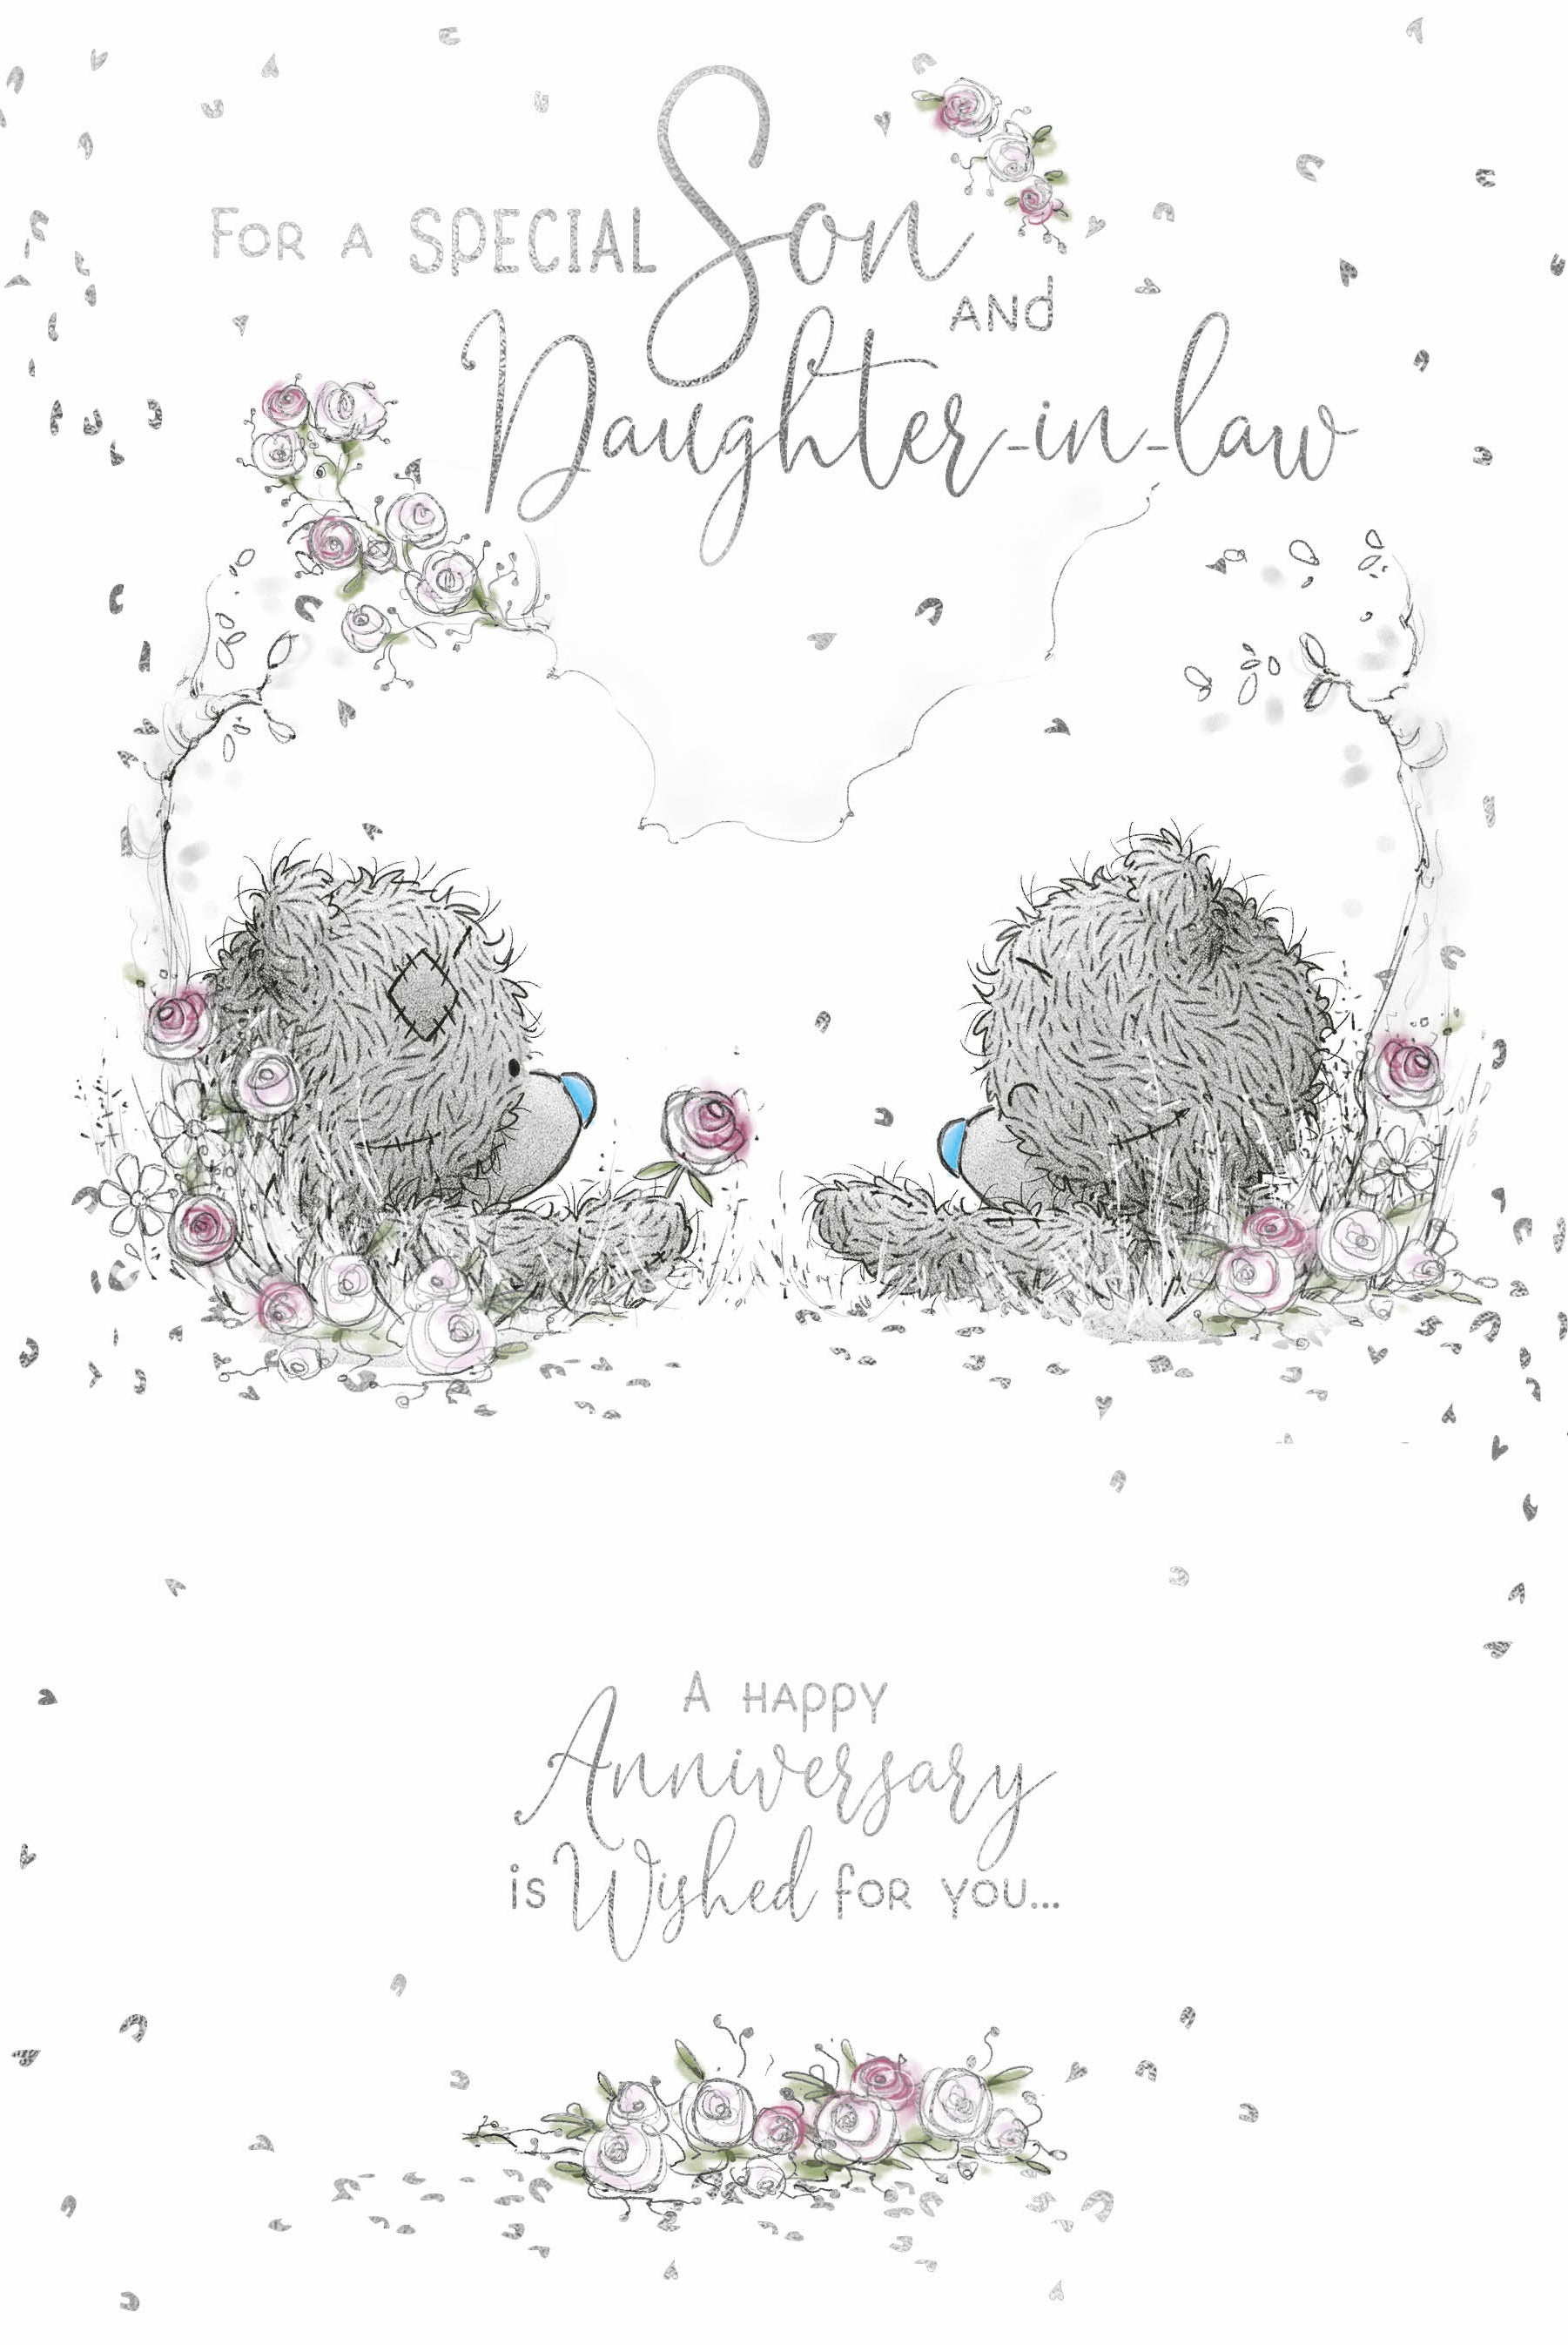 Son and Daughter-in-Law on Your Wedding Anniversary Card - Bears With Rose